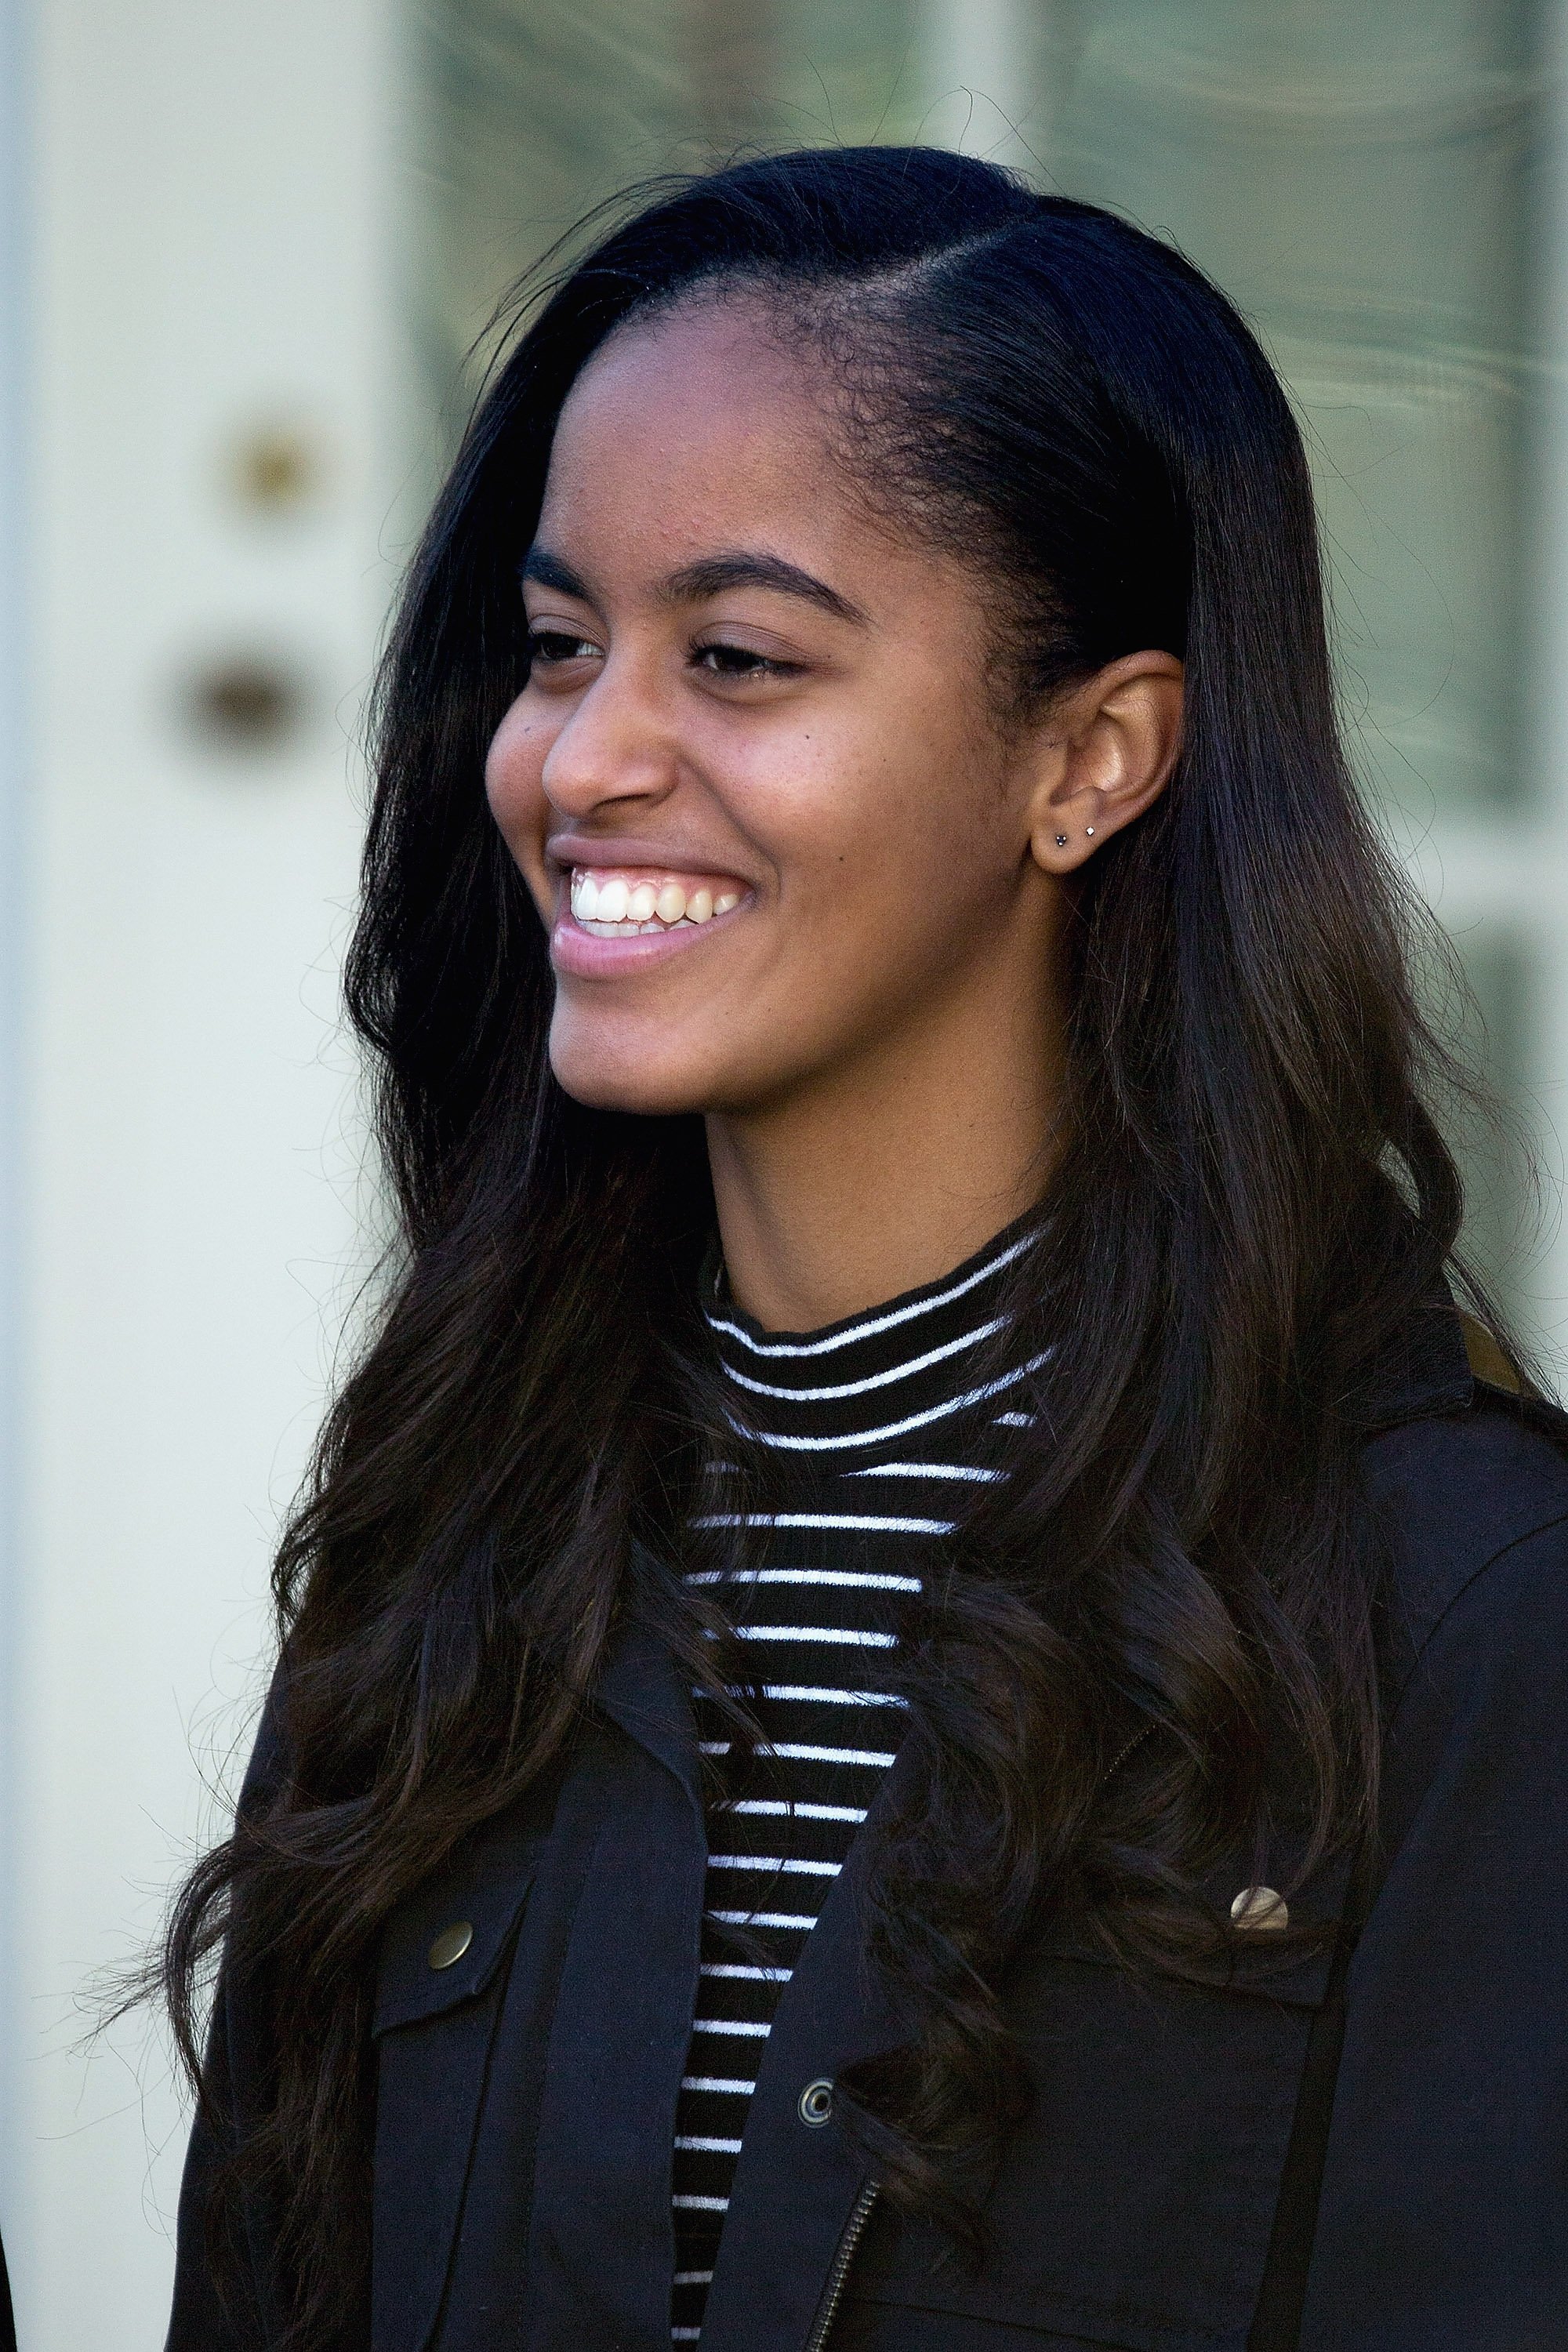 Malia Obama participates in the turkey pardoning ceremony in the Rose Garden at the White House November 25, 2015. | Photo: GettyImages